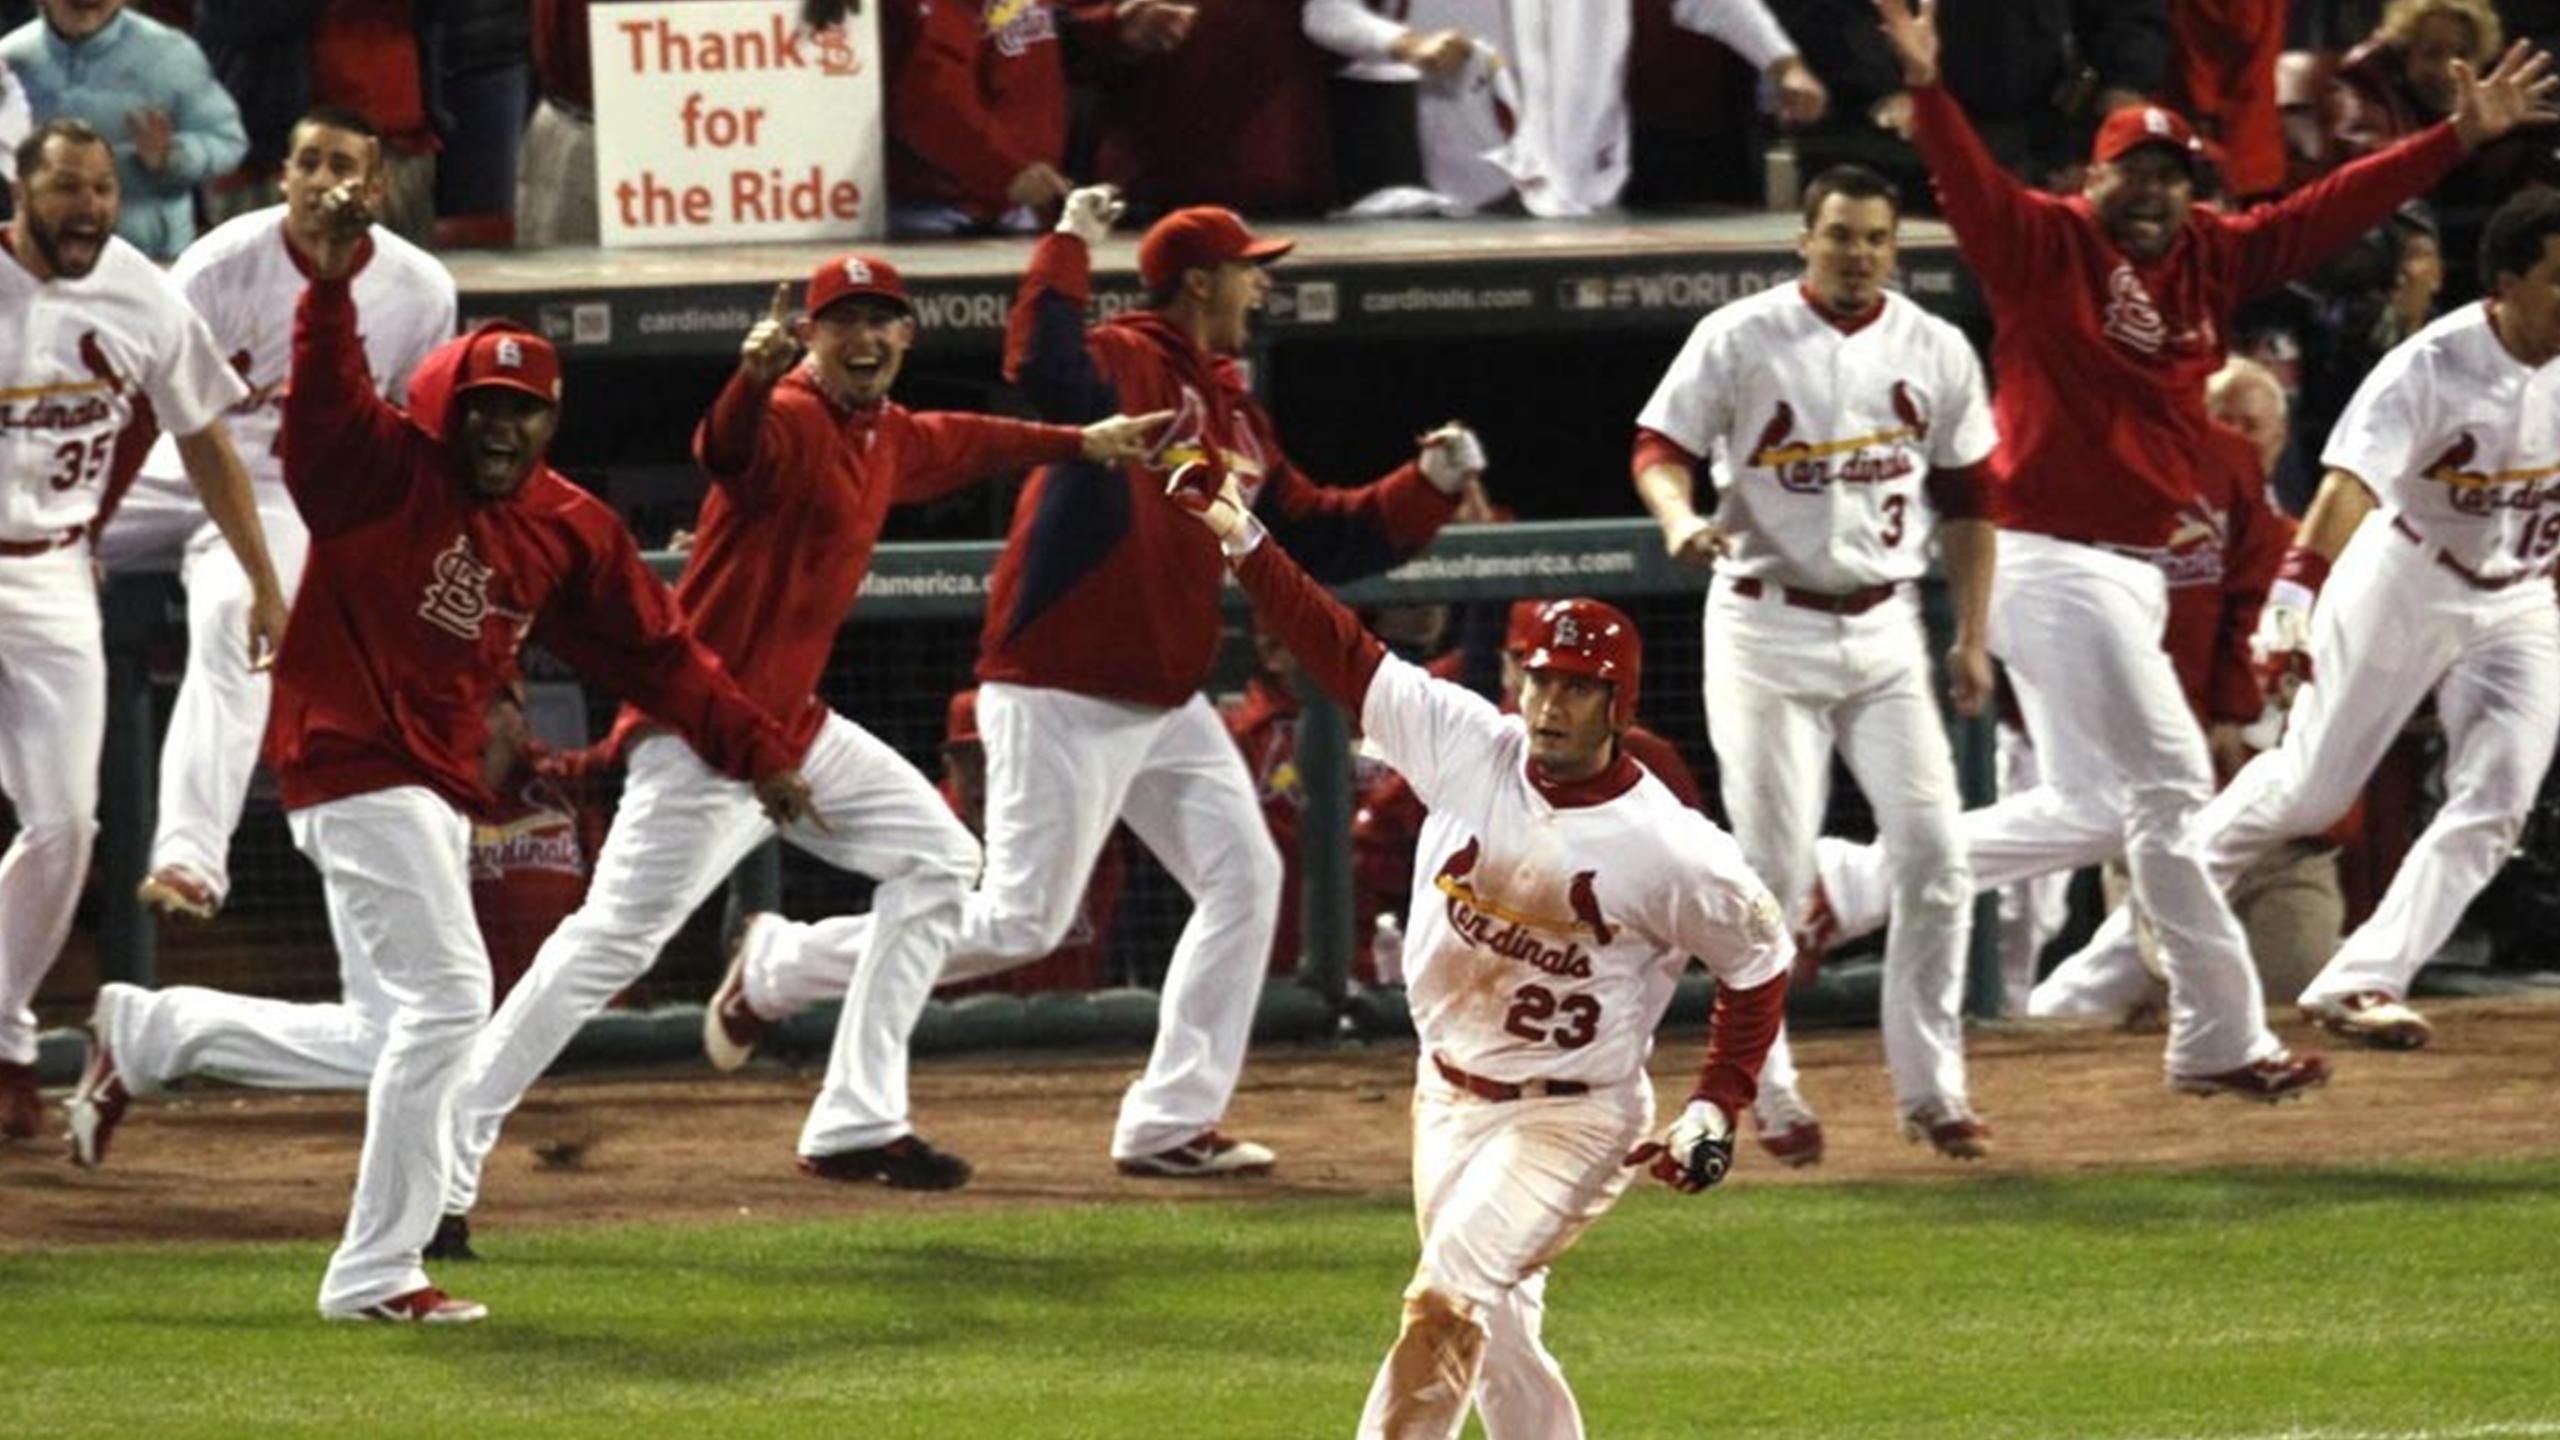 David Freese's homer in 11th forces World Series Game 7 for St